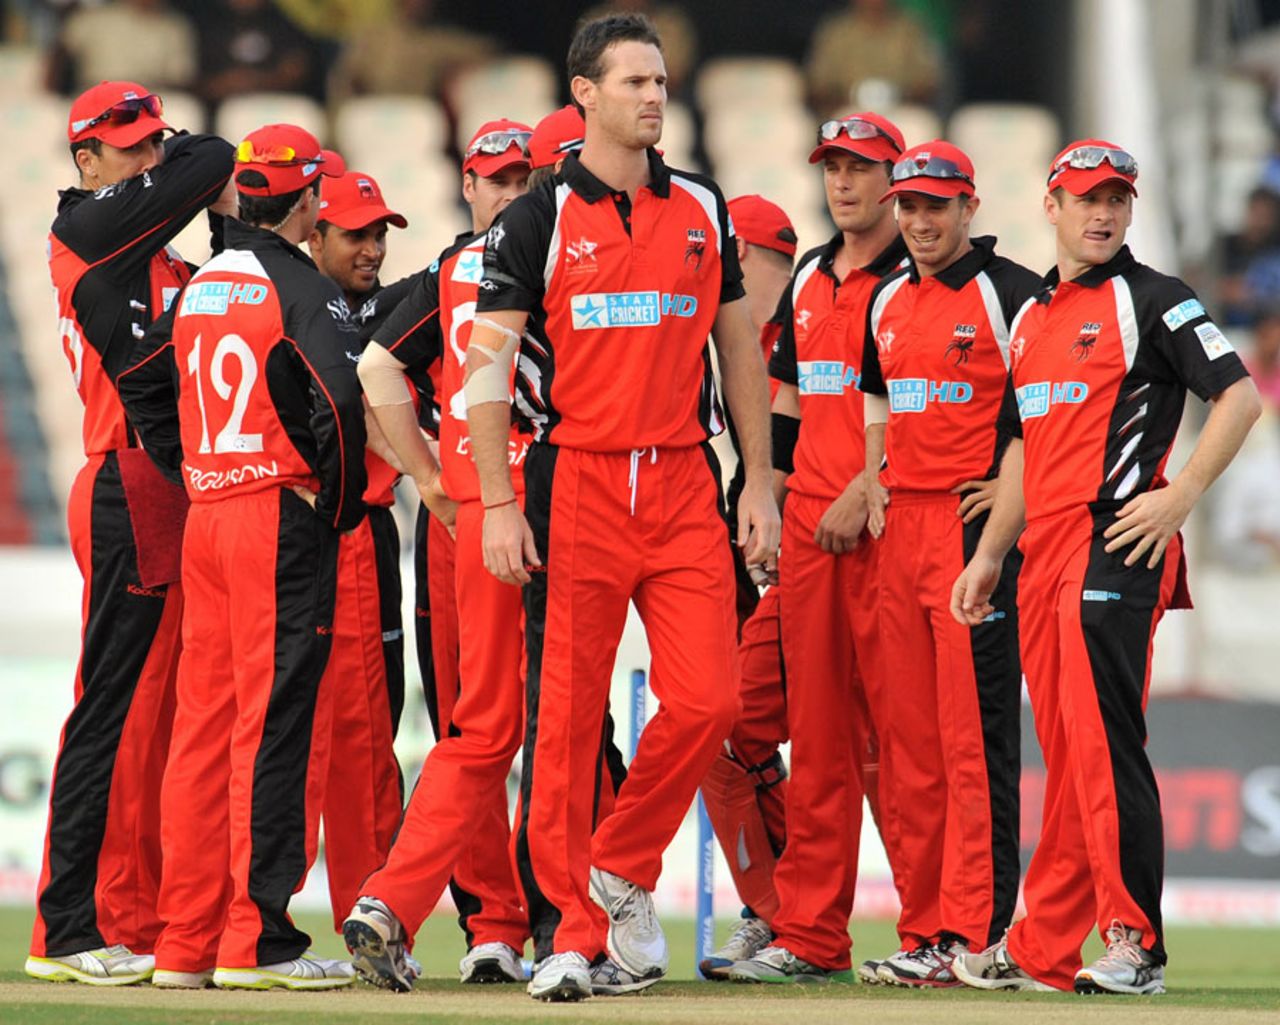 Shaun Tait got an early wicket, South Australia v Warriors, Champions League T20, Hyderabad, September 25, 2011